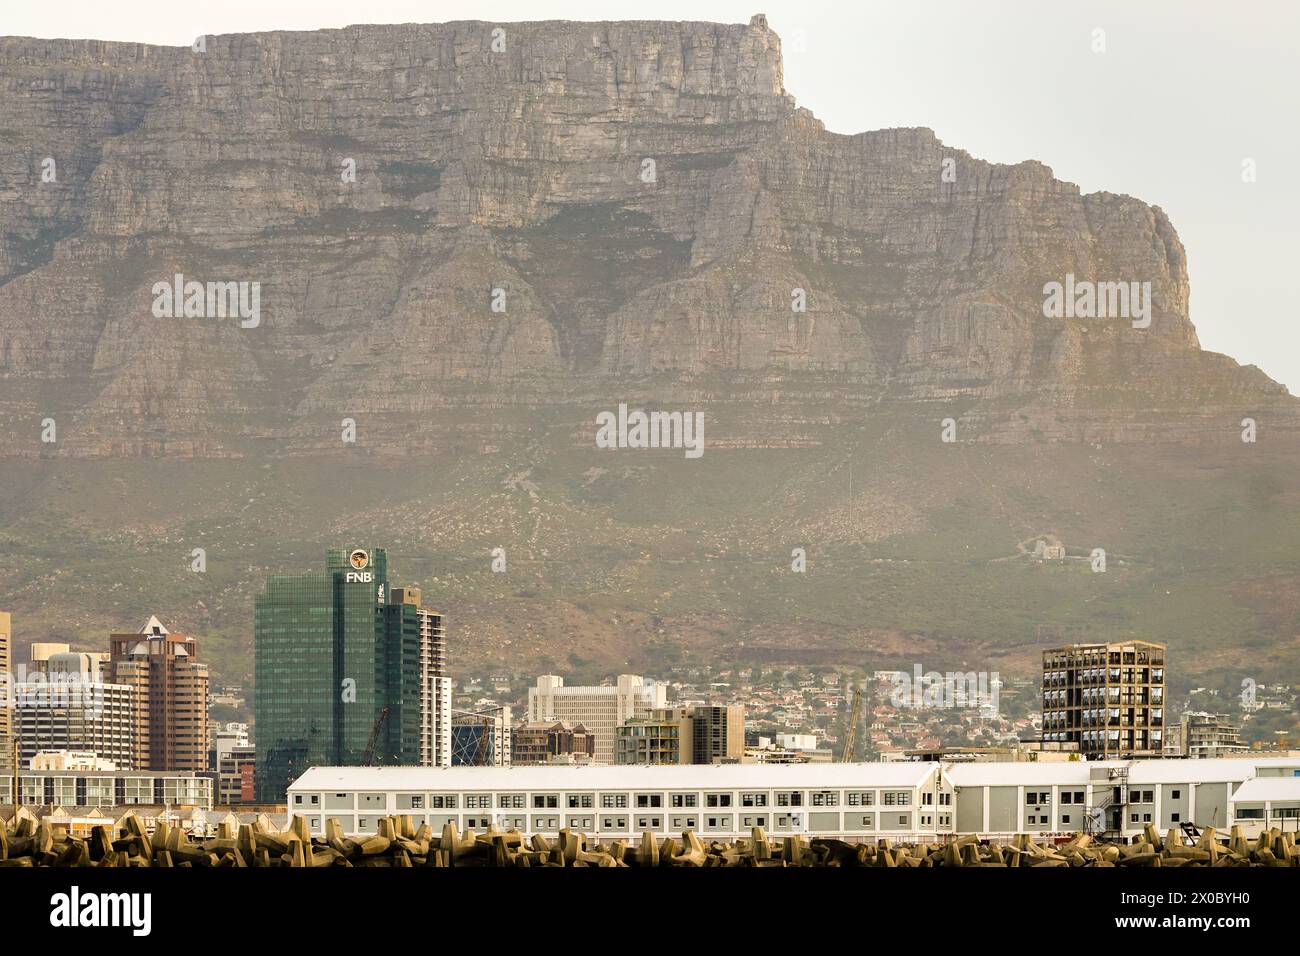 Table mountain, Cape Town, South Africa close up view of city buildings and skyline against backdrop of well known mountain concept travel and tourism Stock Photo